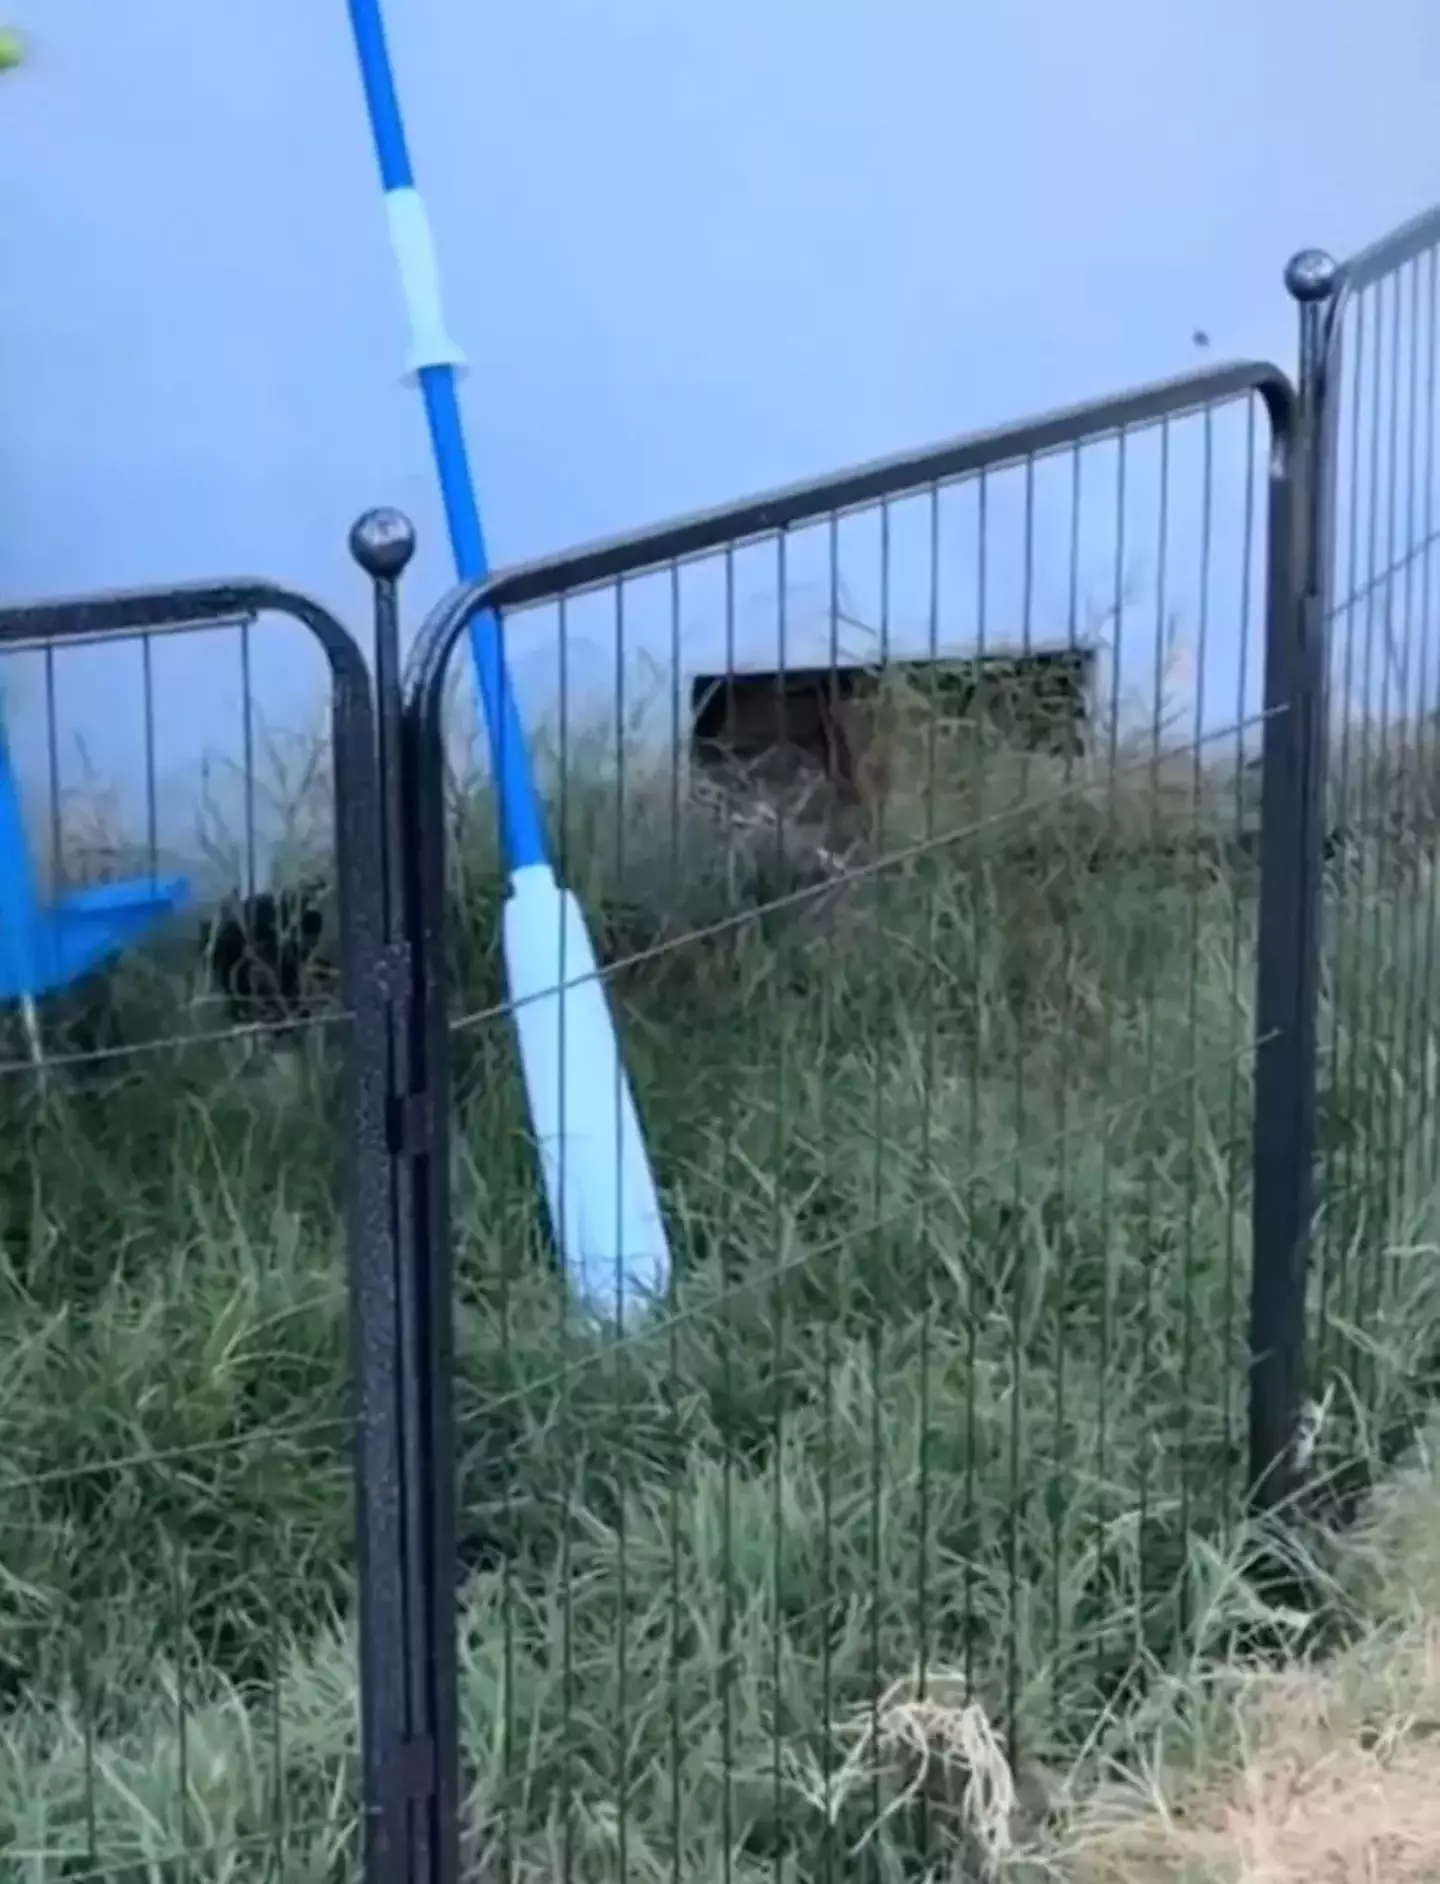 The woman spotted an arm coming out of a hole in her house.